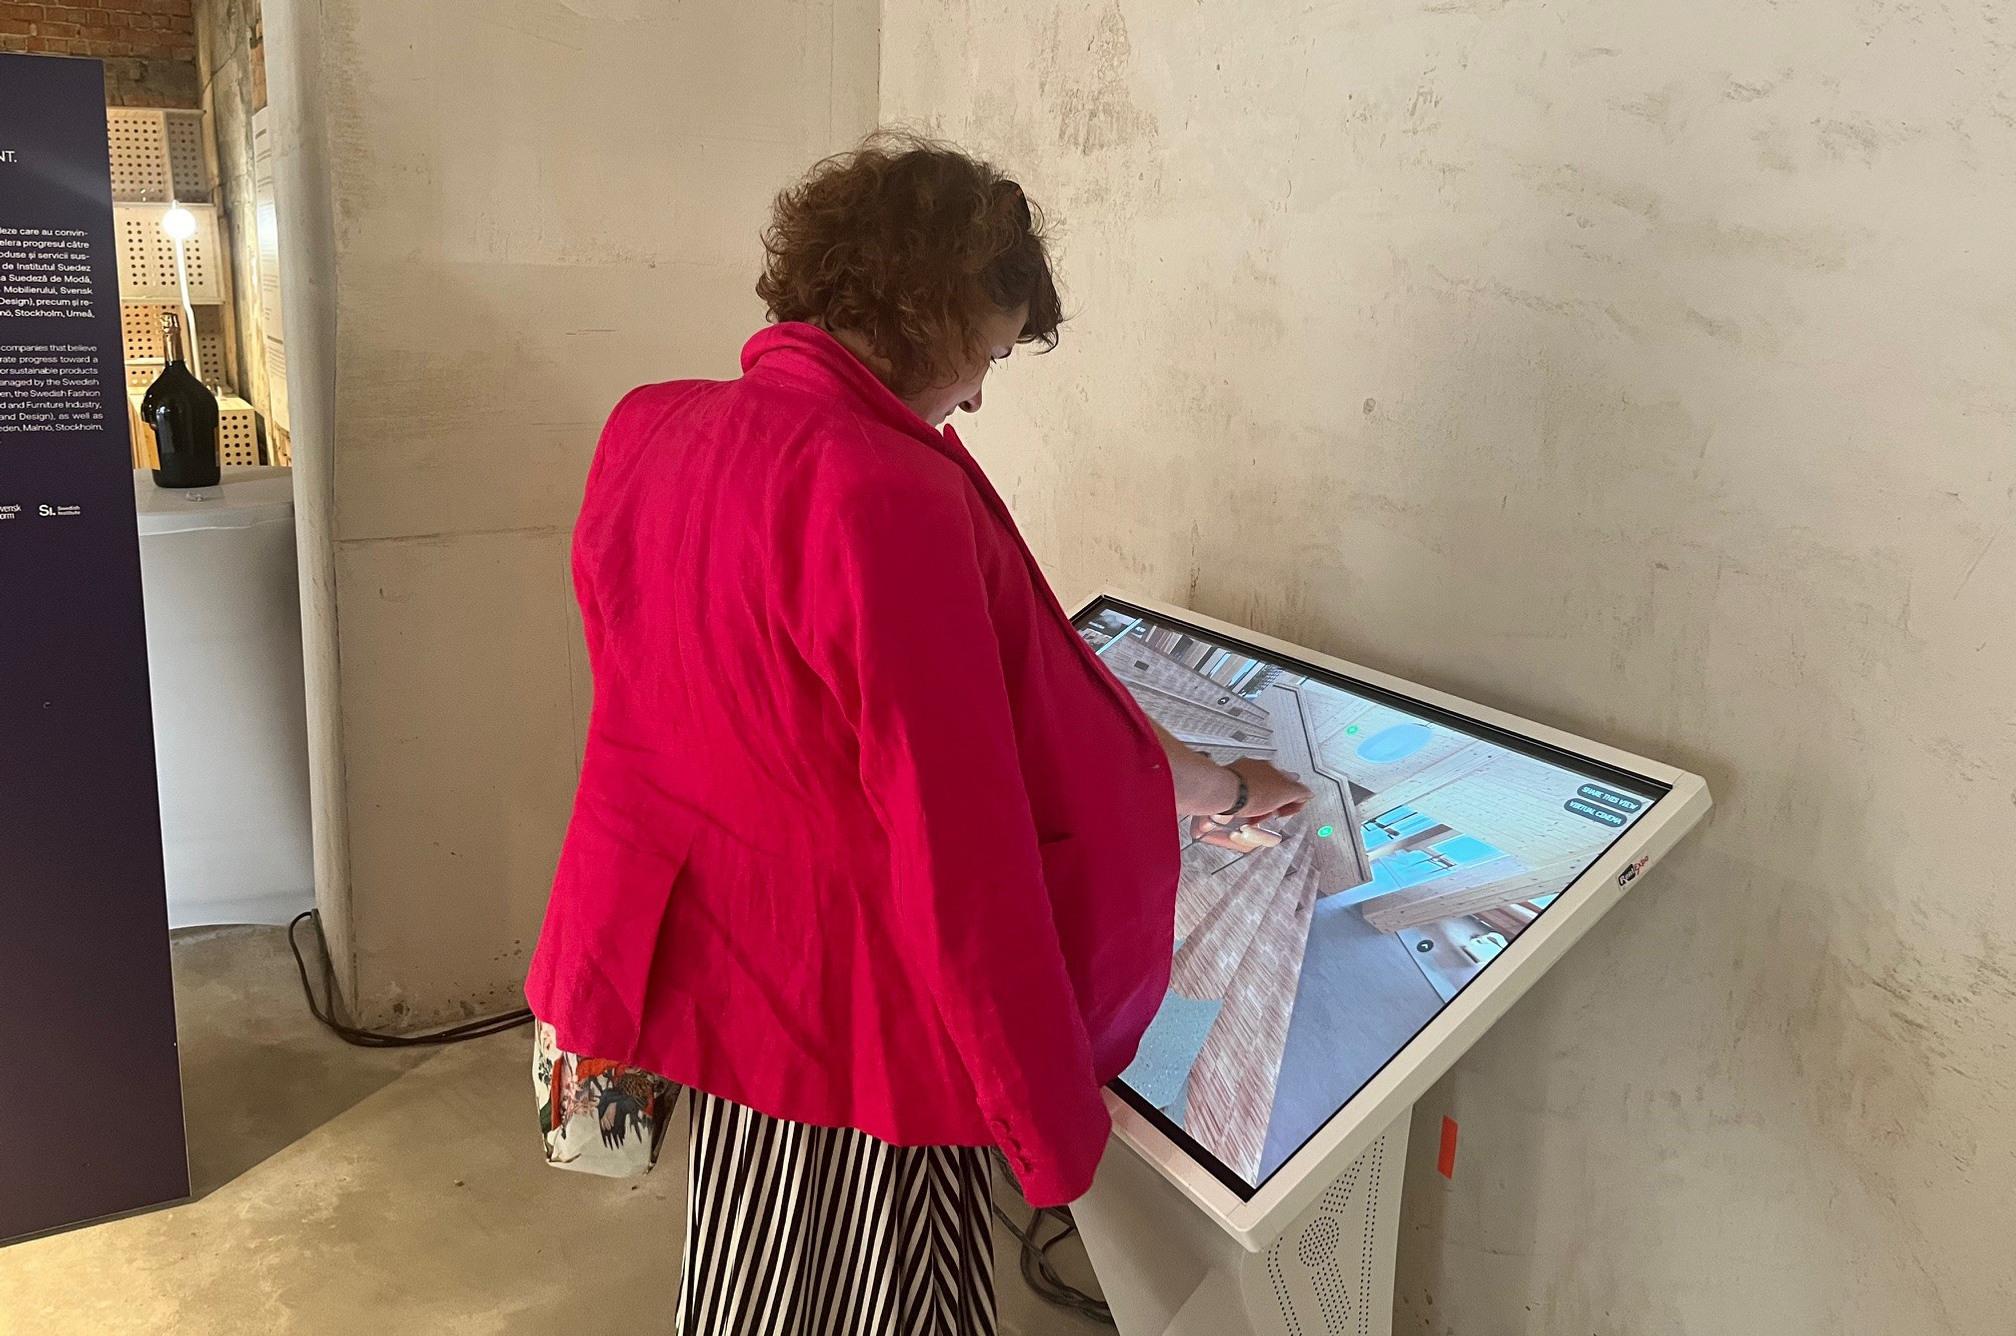 A woman in a red blazer using a touch screen.